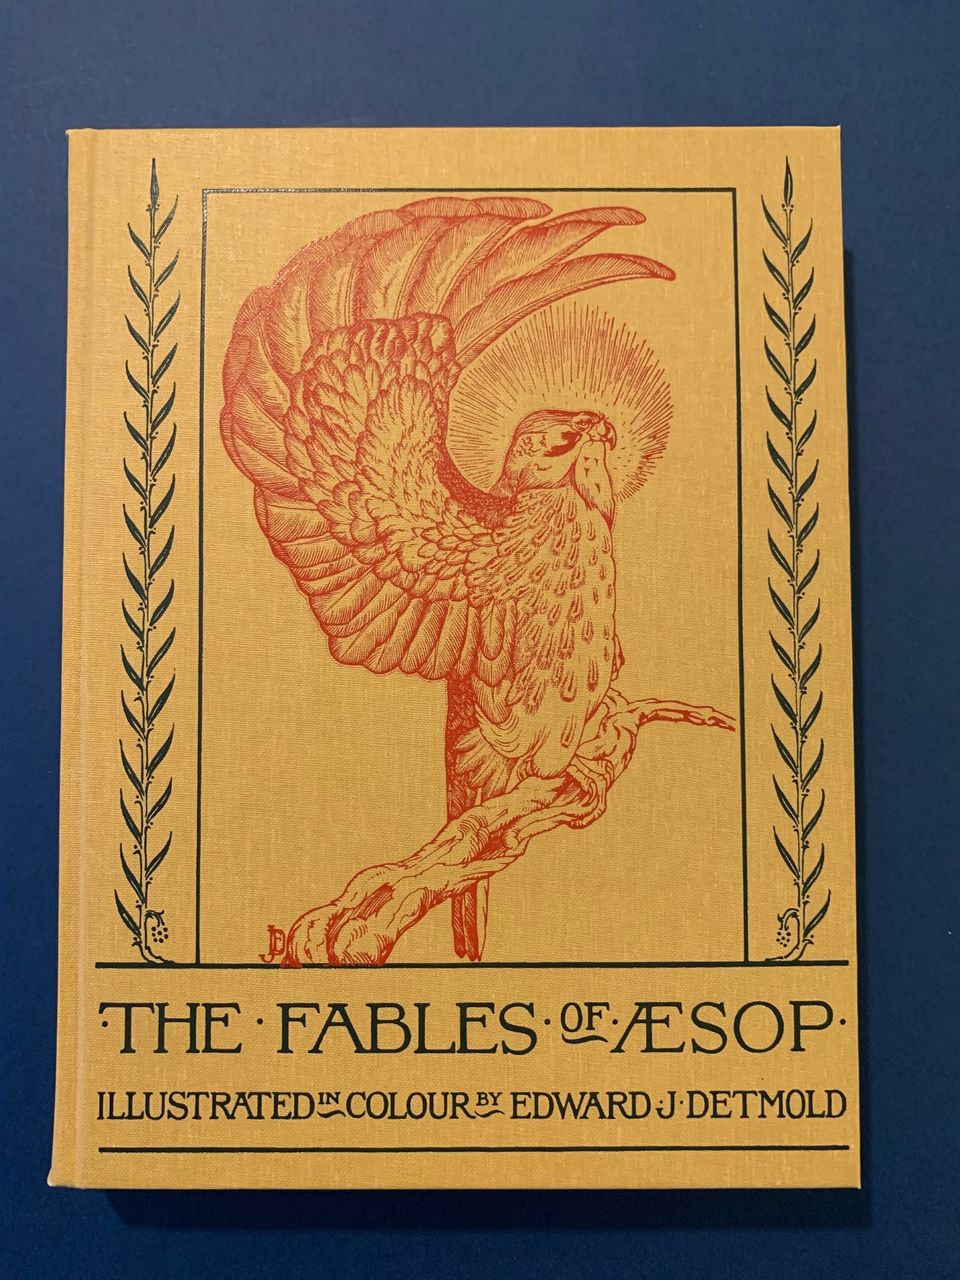 The Fables Of Aesop (Folio Society, 2001)